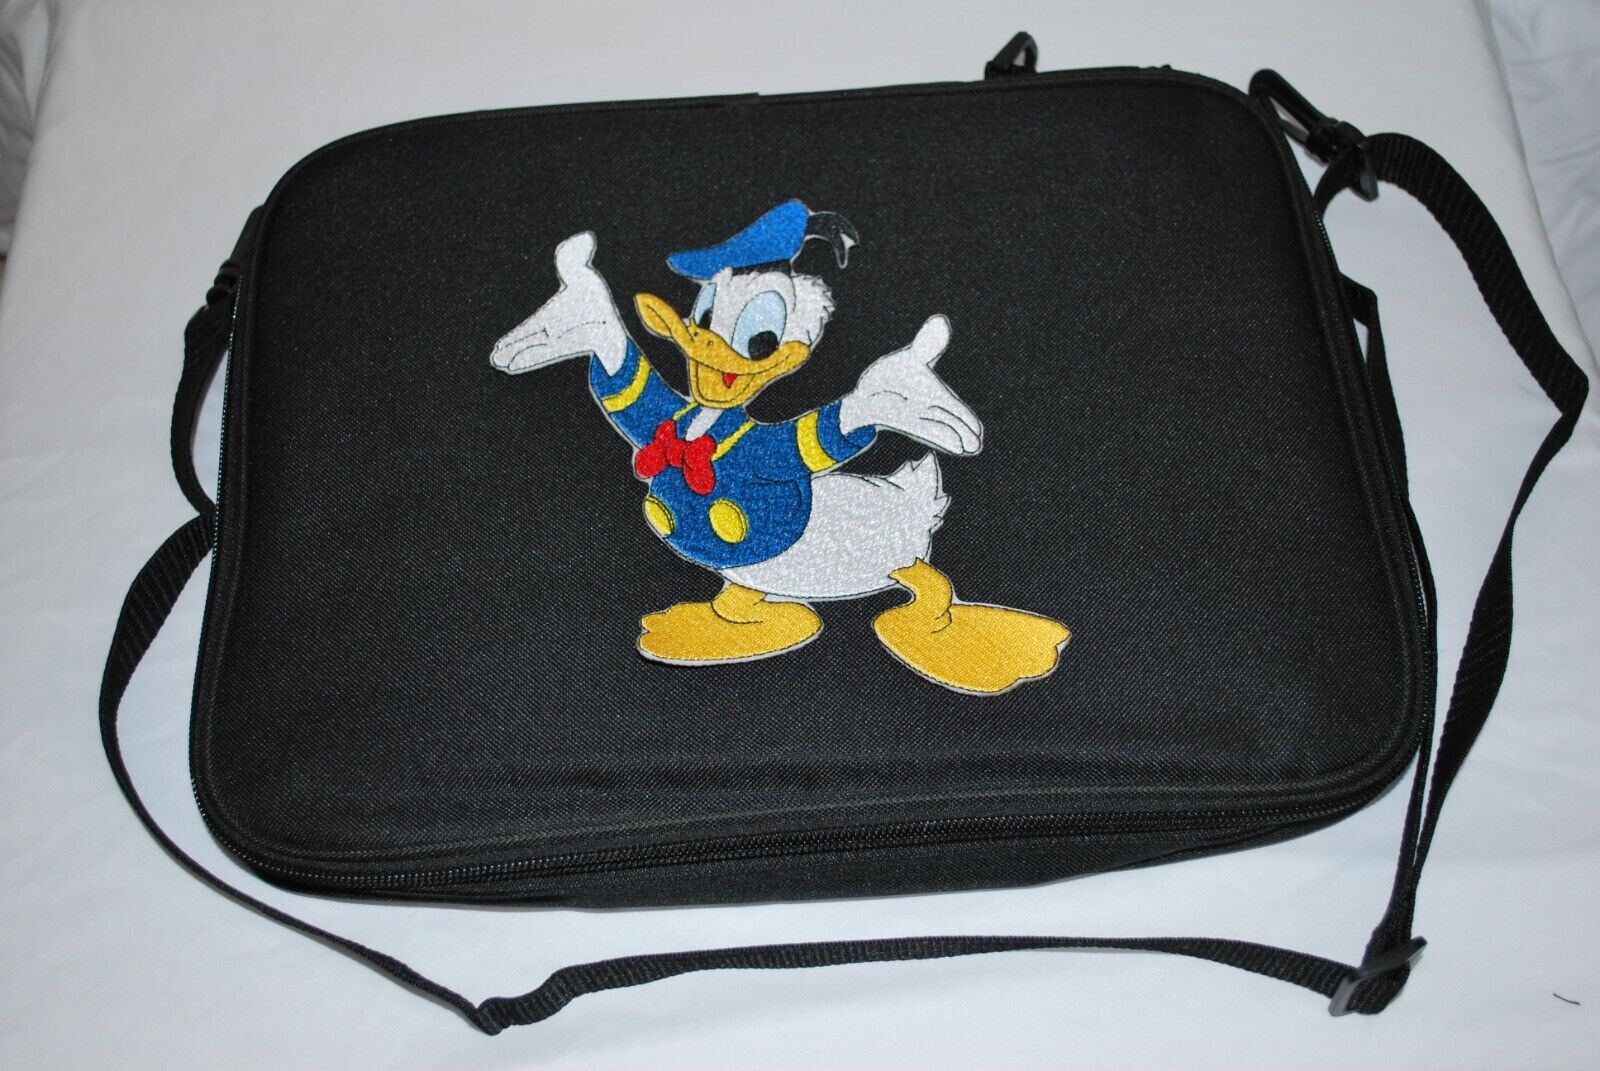 NEW Embroidery Happy Donald Duck Pin Trading Book Bag for Disney Pin Collections